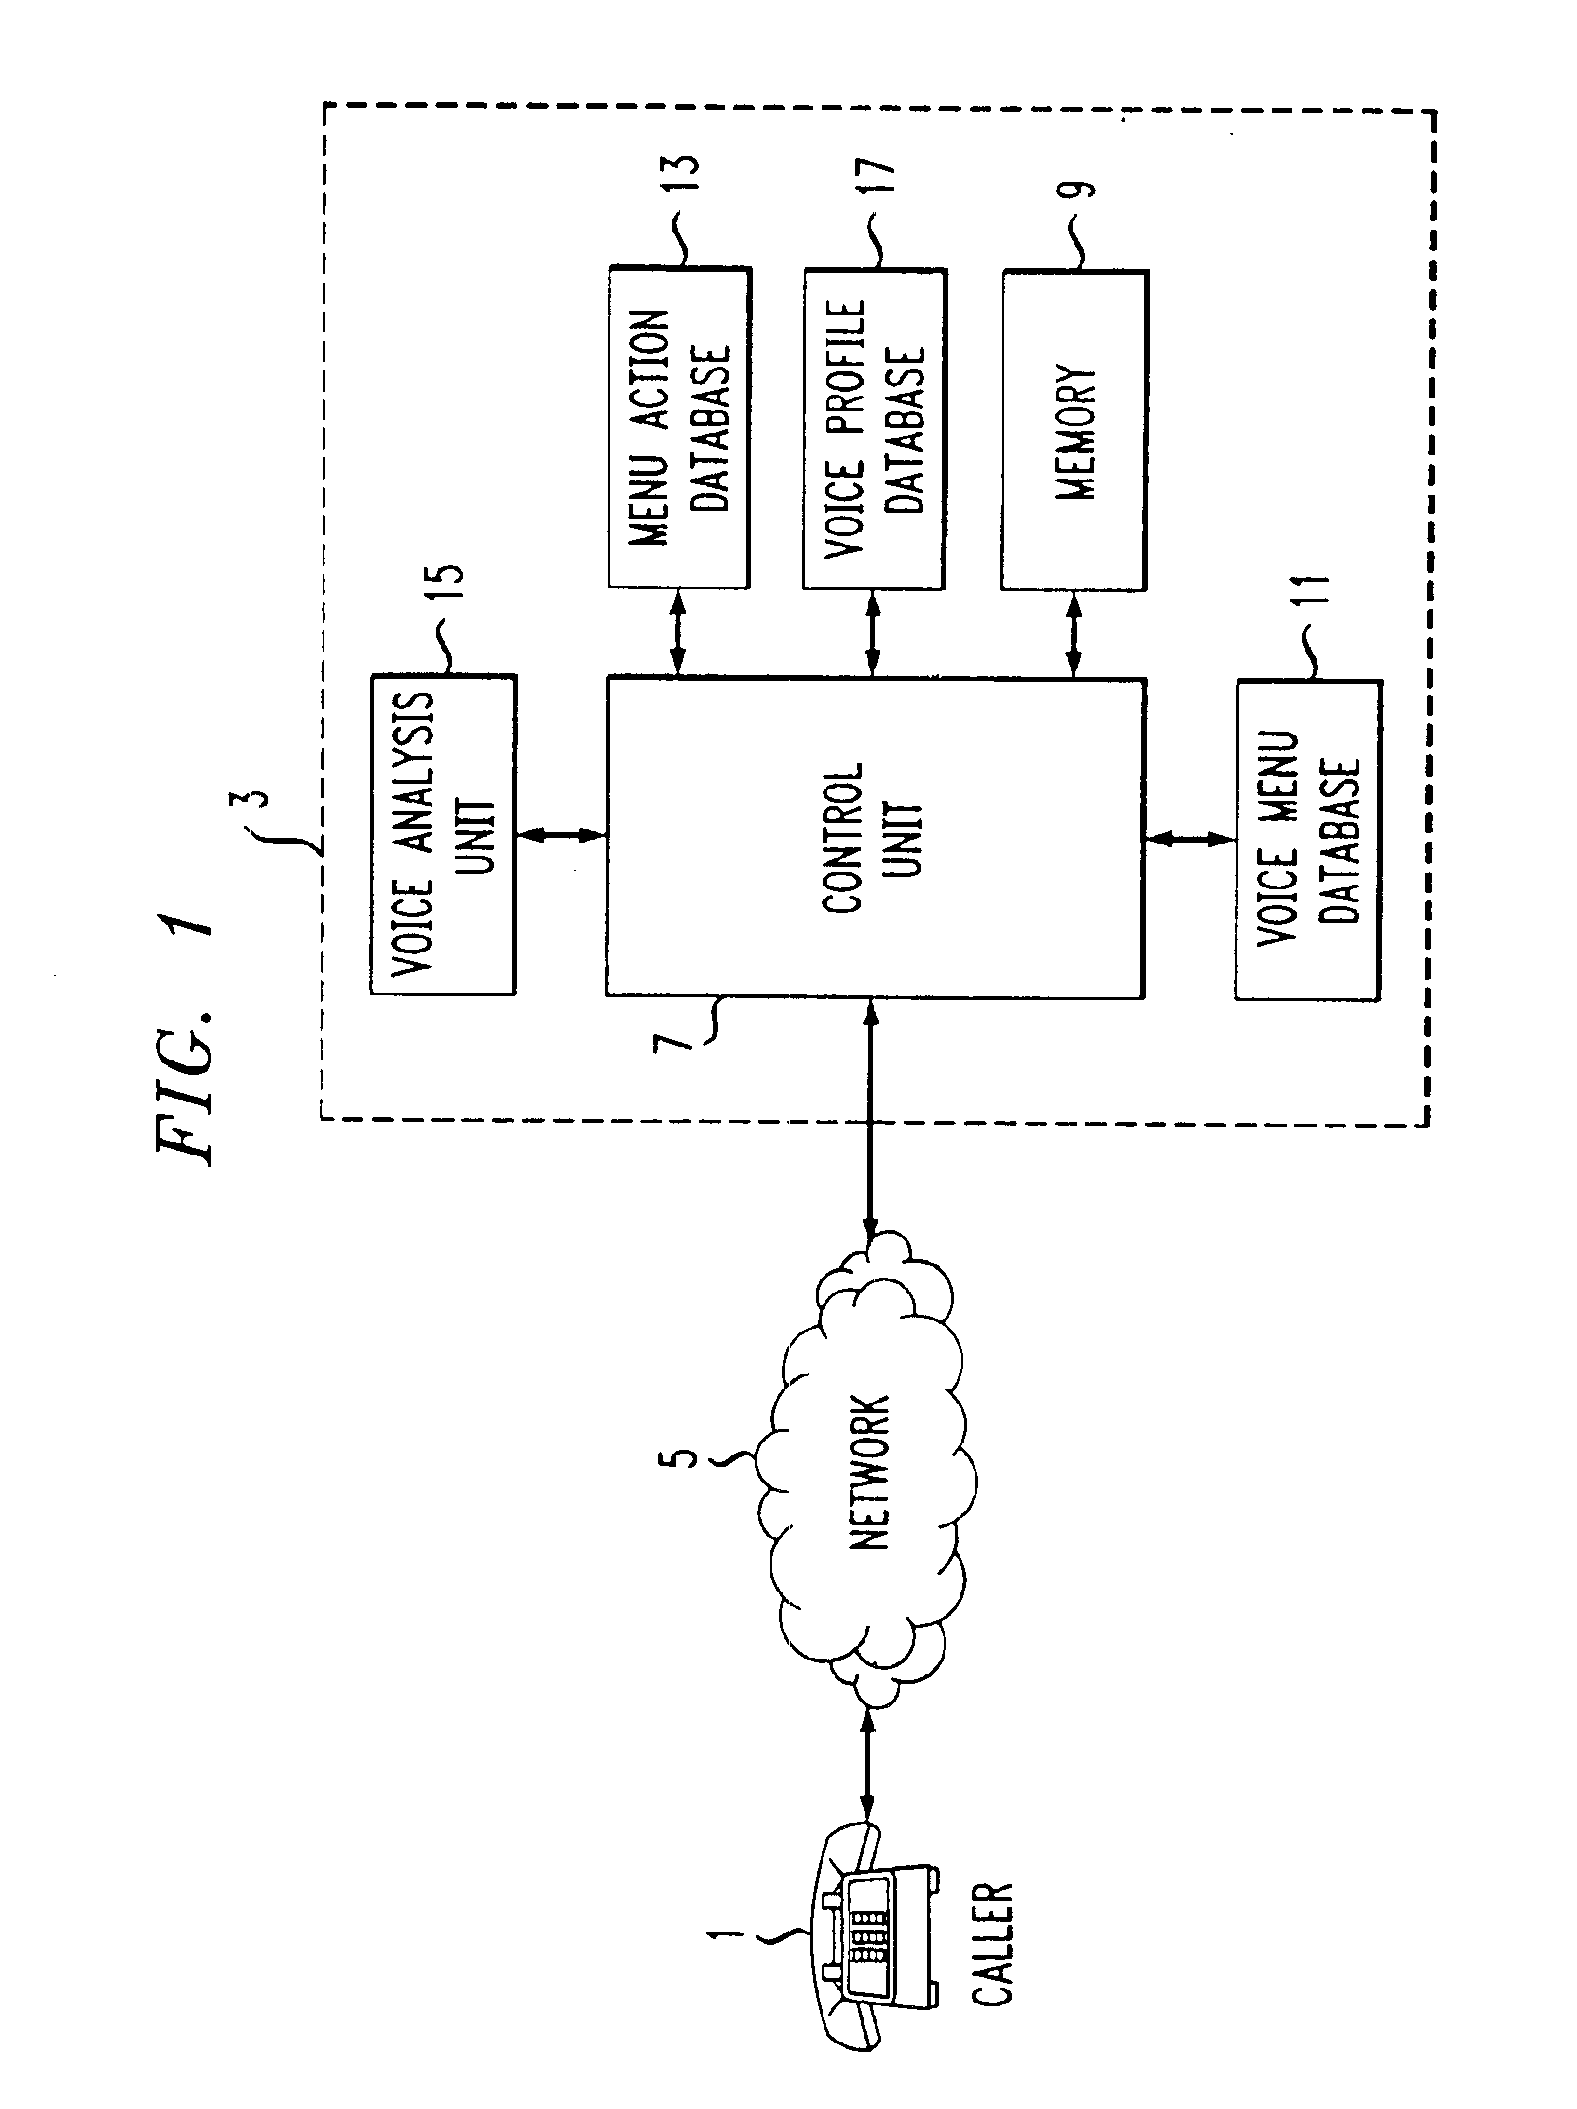 Method of providing a user interface for audio telecommunications systems